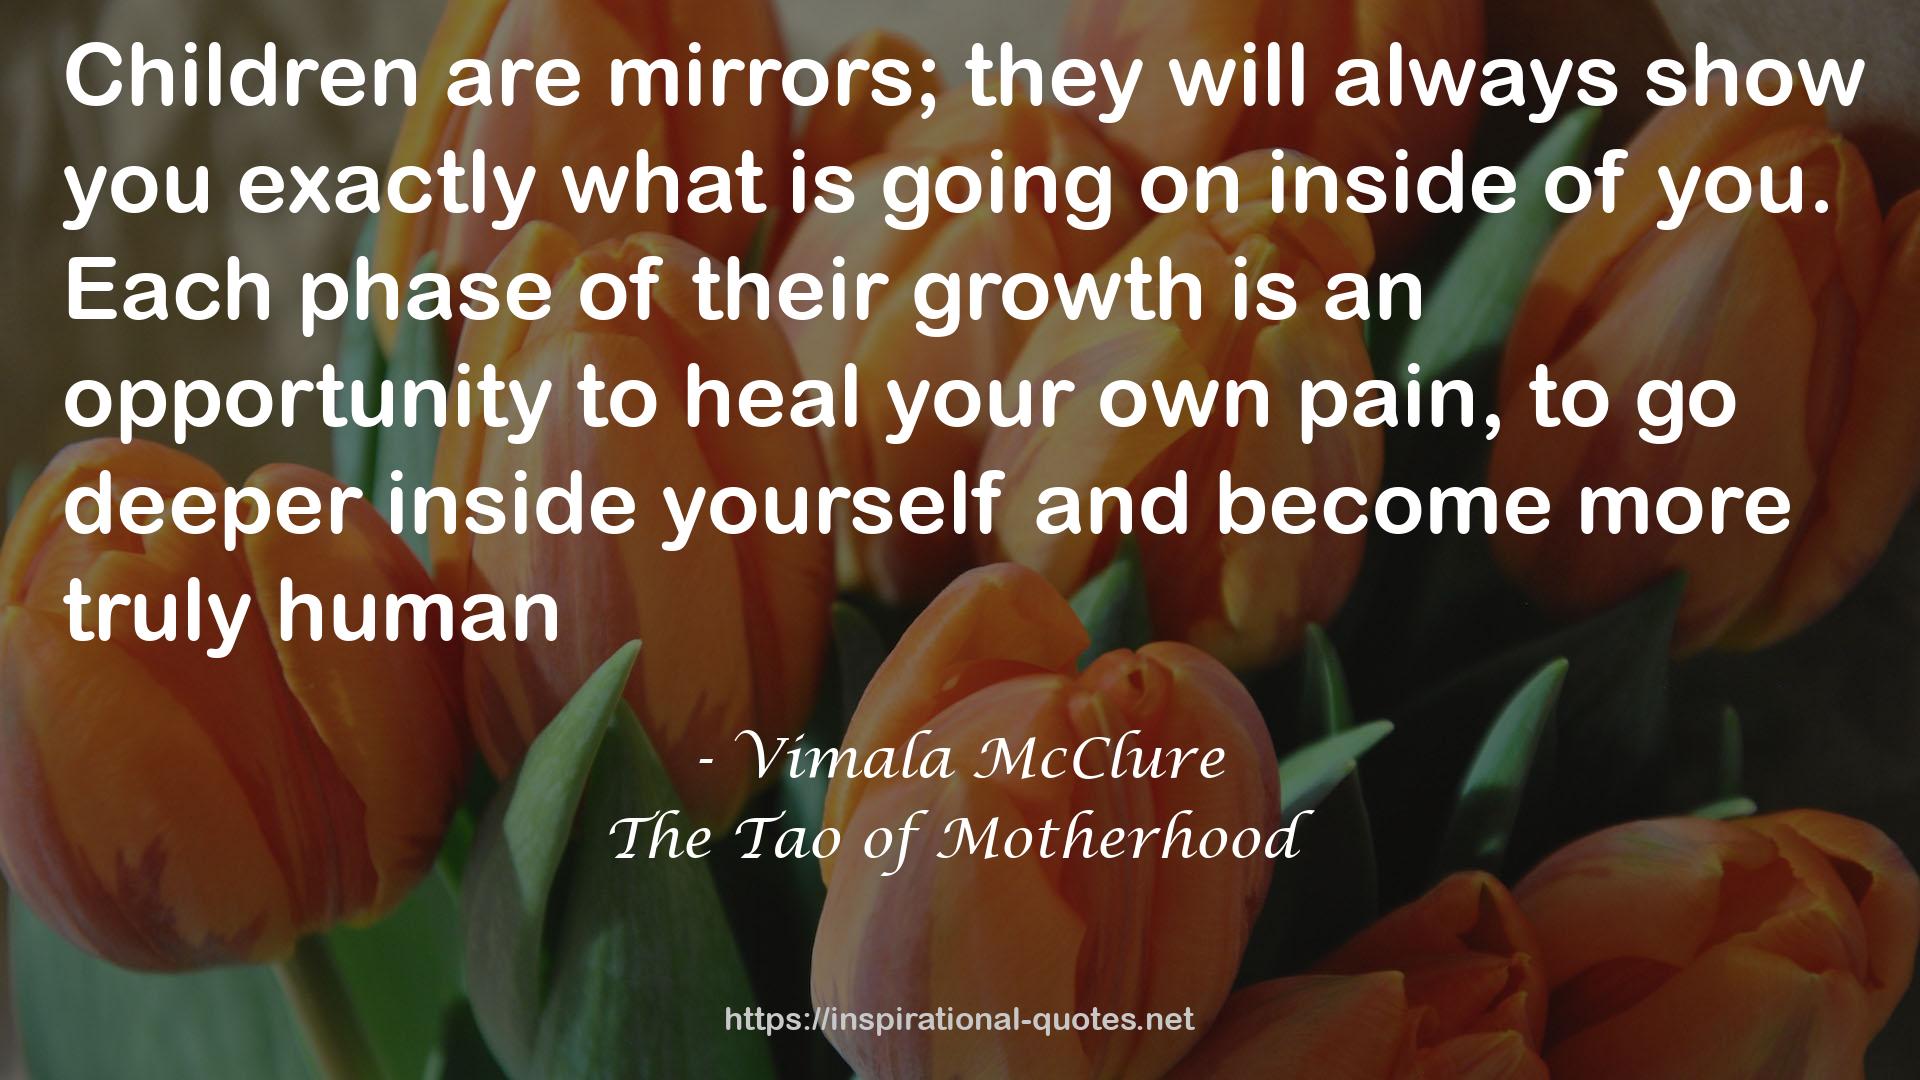 The Tao of Motherhood QUOTES